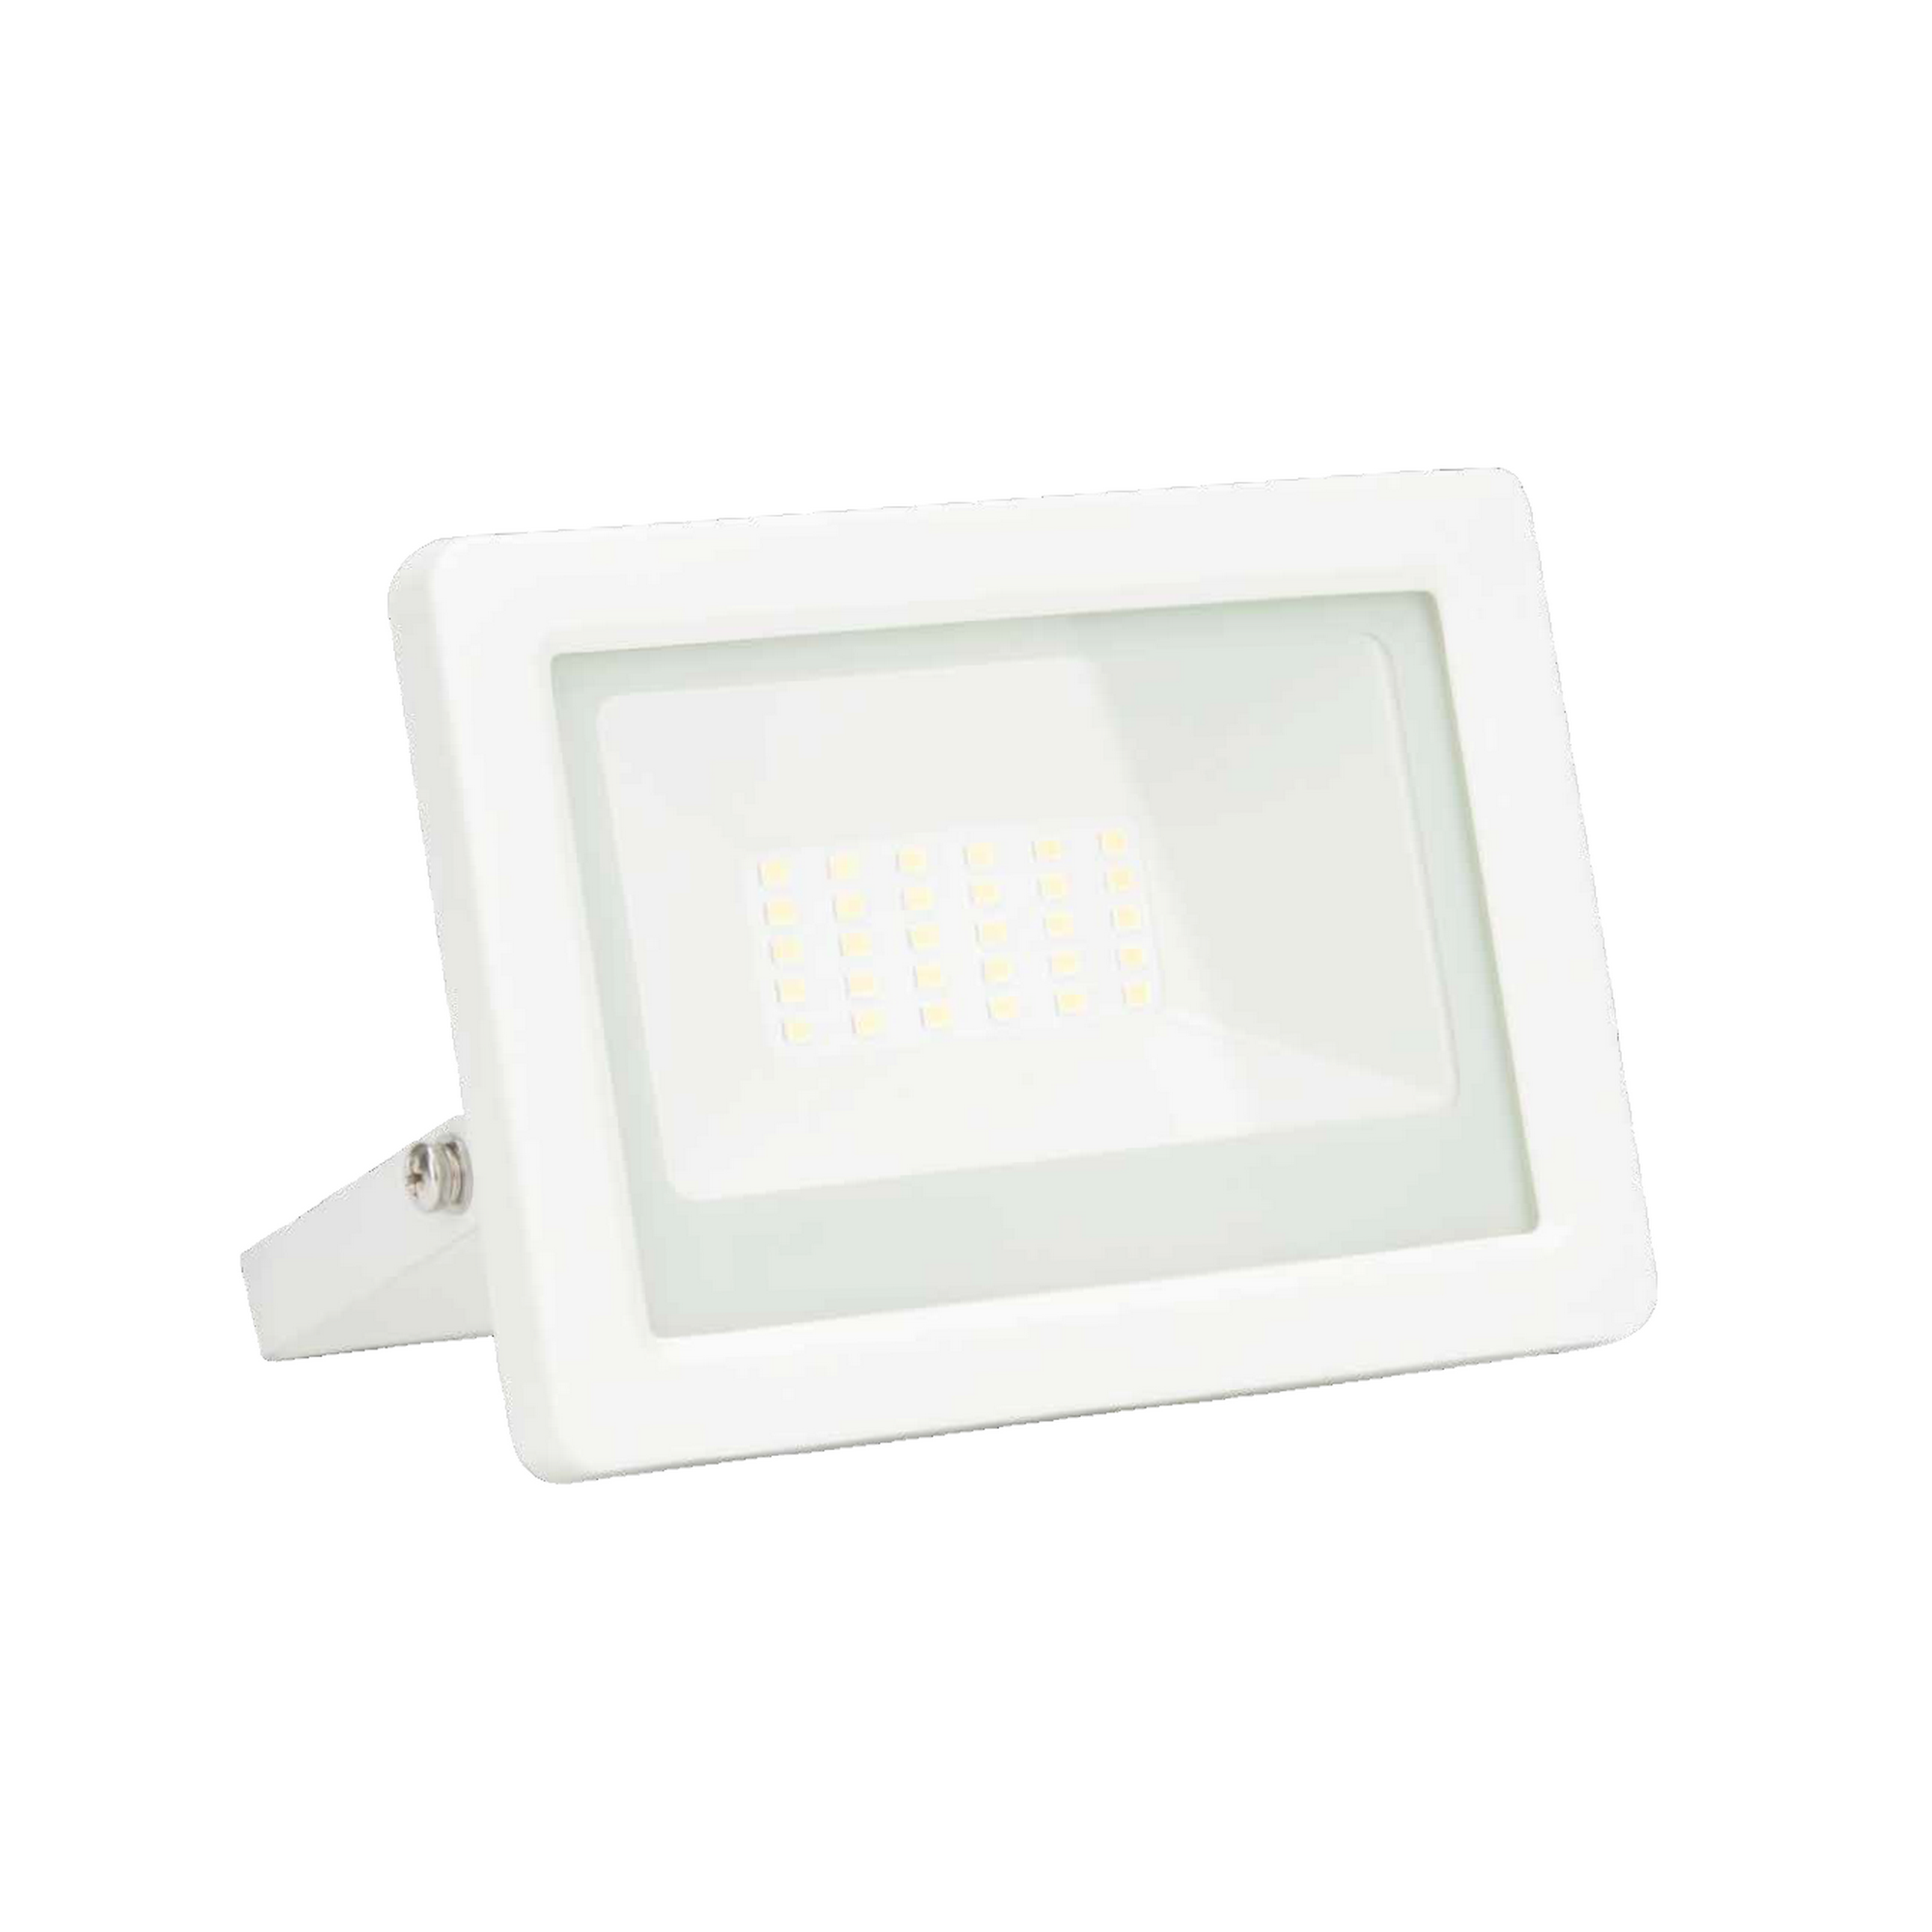 LED-Wandfluter weiß 20 W 1450 lm + product picture